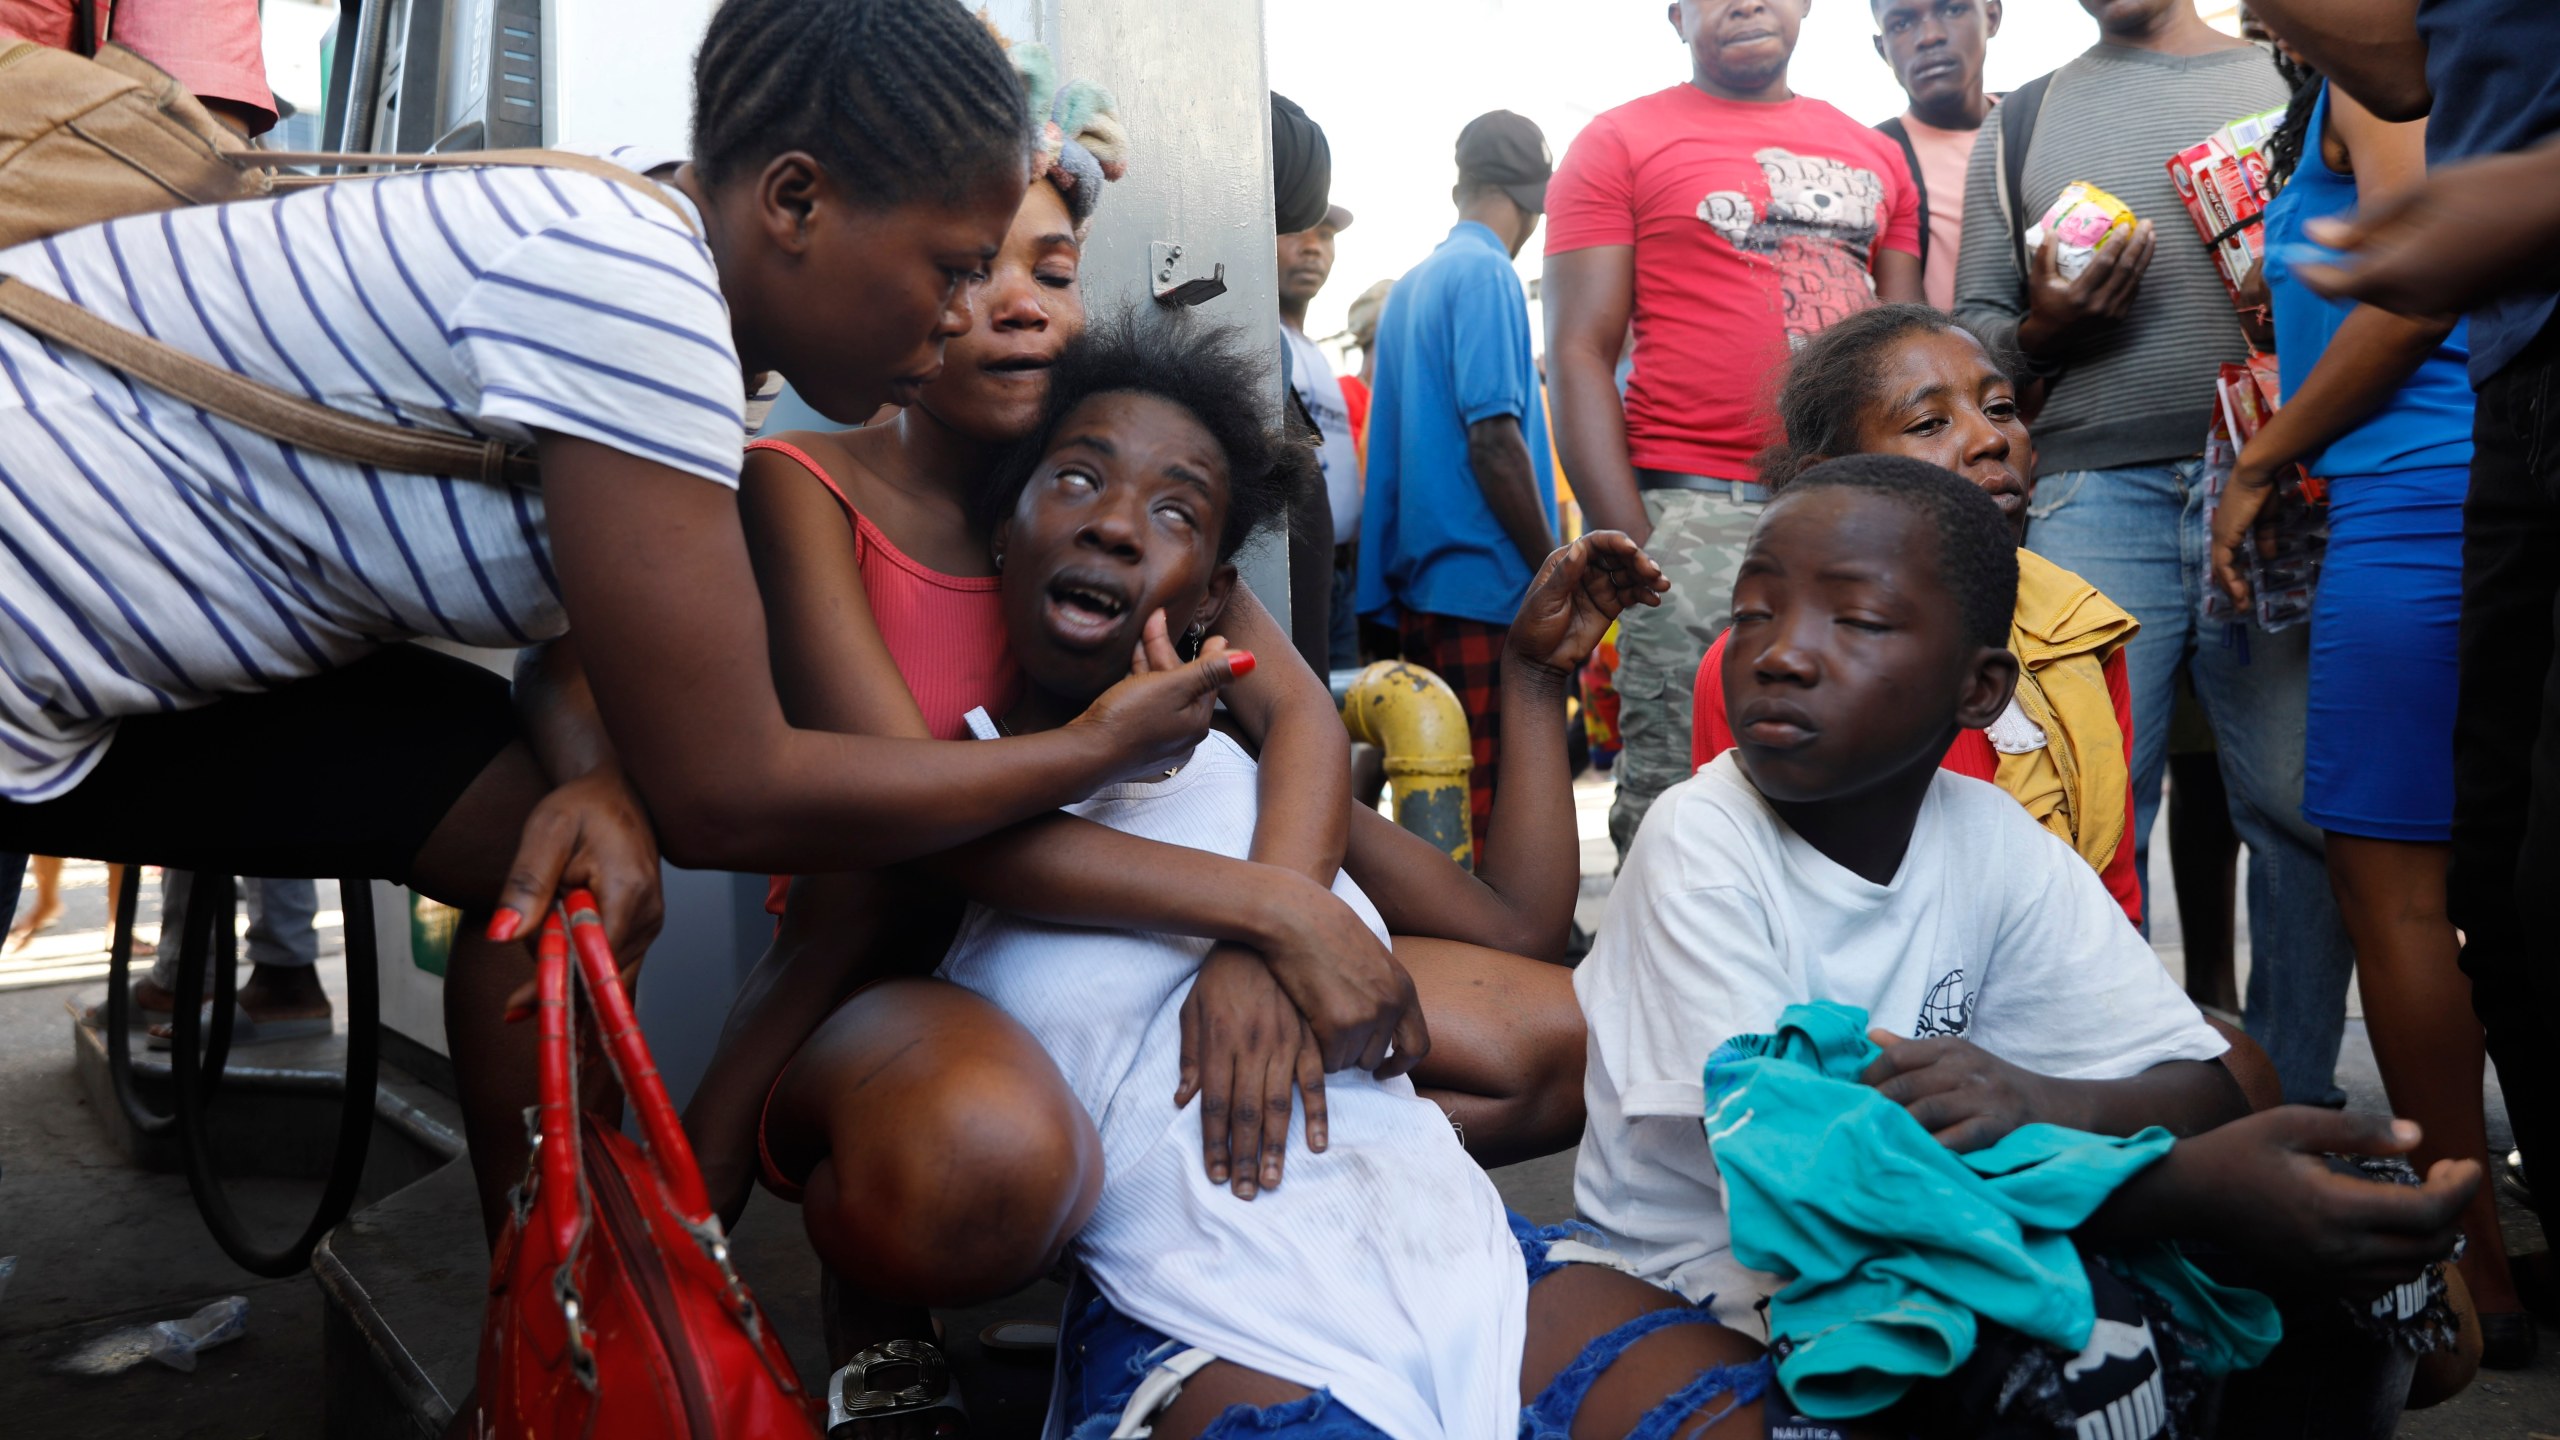 The relative of a person found dead in the street reacts after an overnight shooting in the Petion Ville neighborhood of Port-au-Prince, Haiti, Monday, March 18, 2024. (AP Photo/Odelyn Joseph)